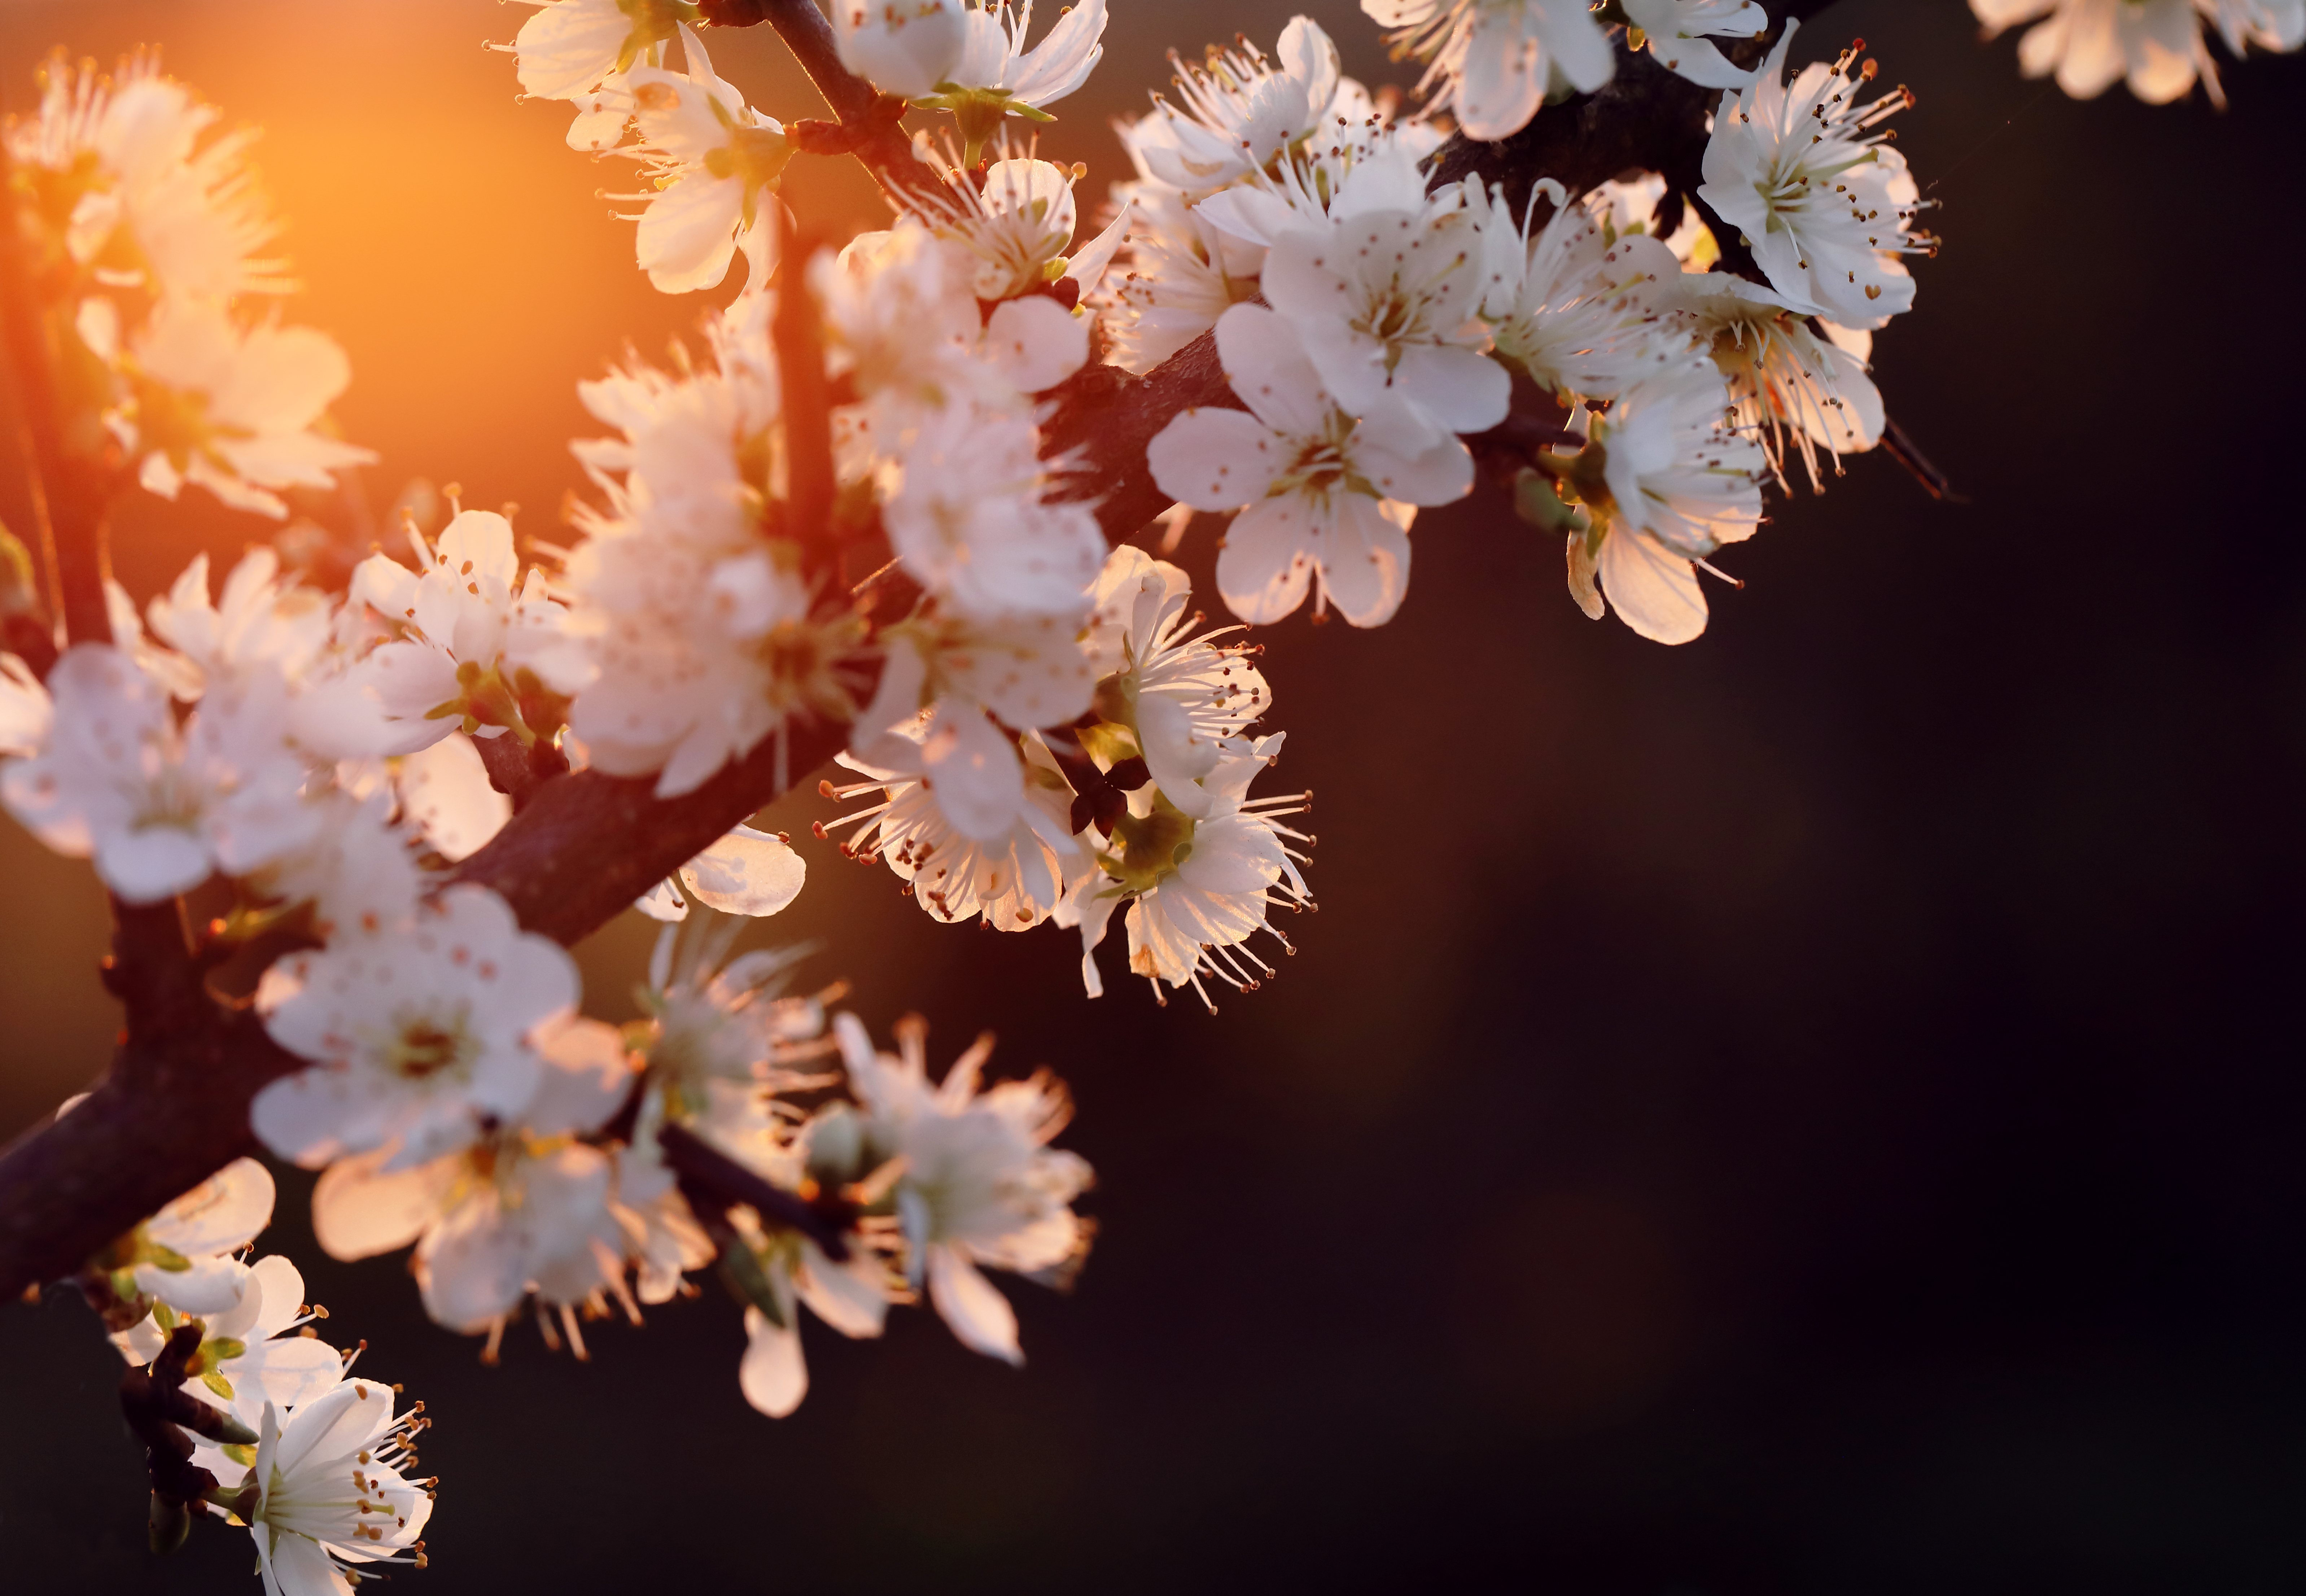 Cherry Blossom 4K Wallpaper:Amazon.com:Appstore for Android